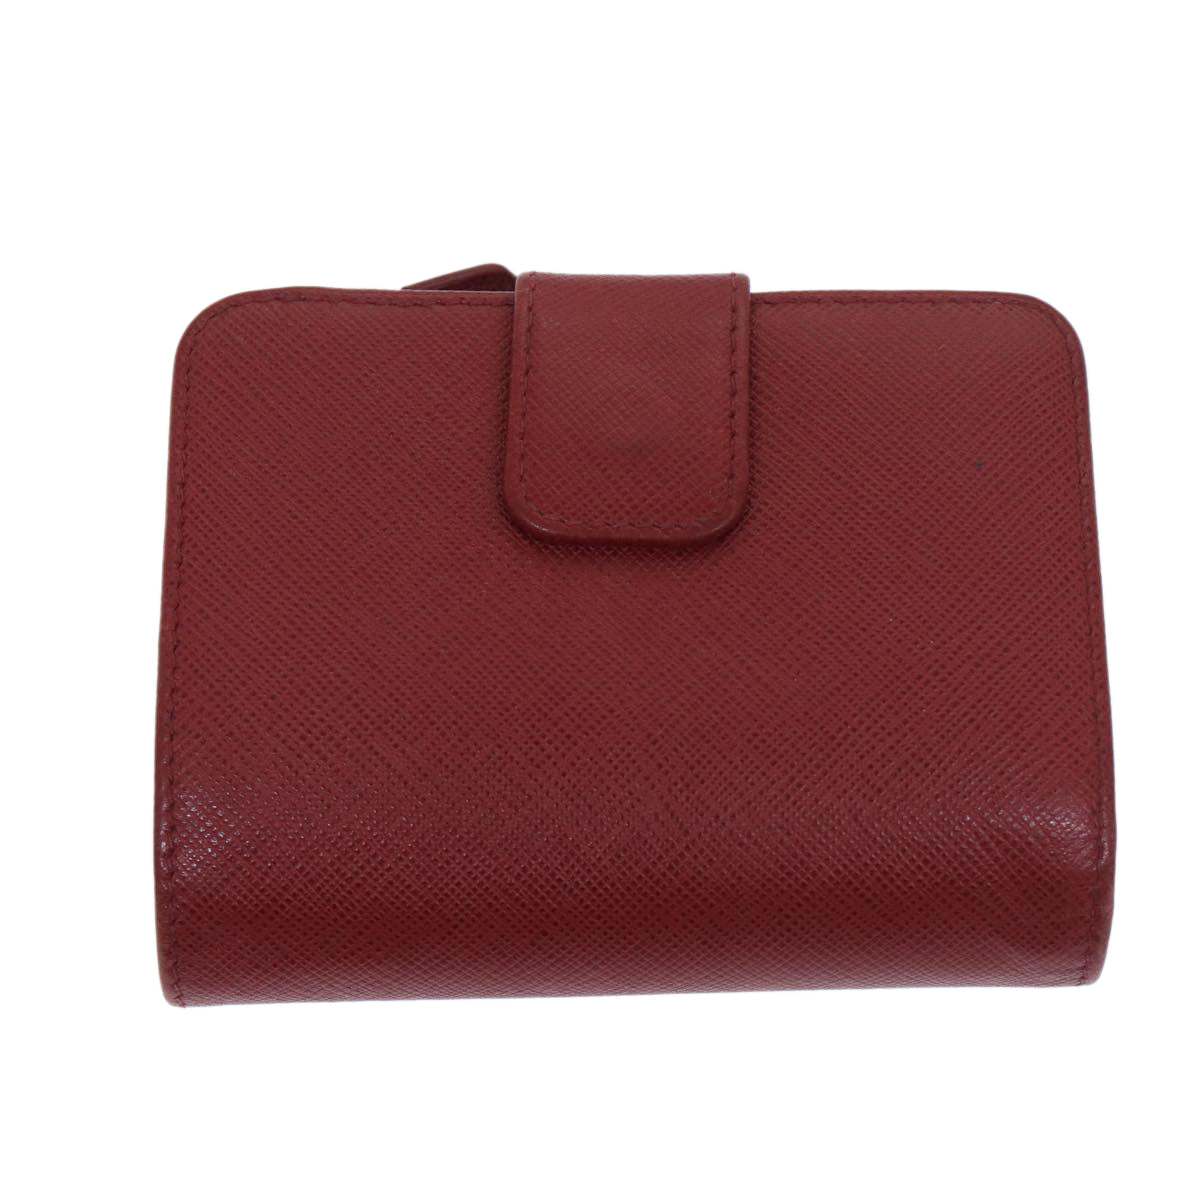 PRADA Bifold Wallet Safiano leather Red Auth ep3880 - 0